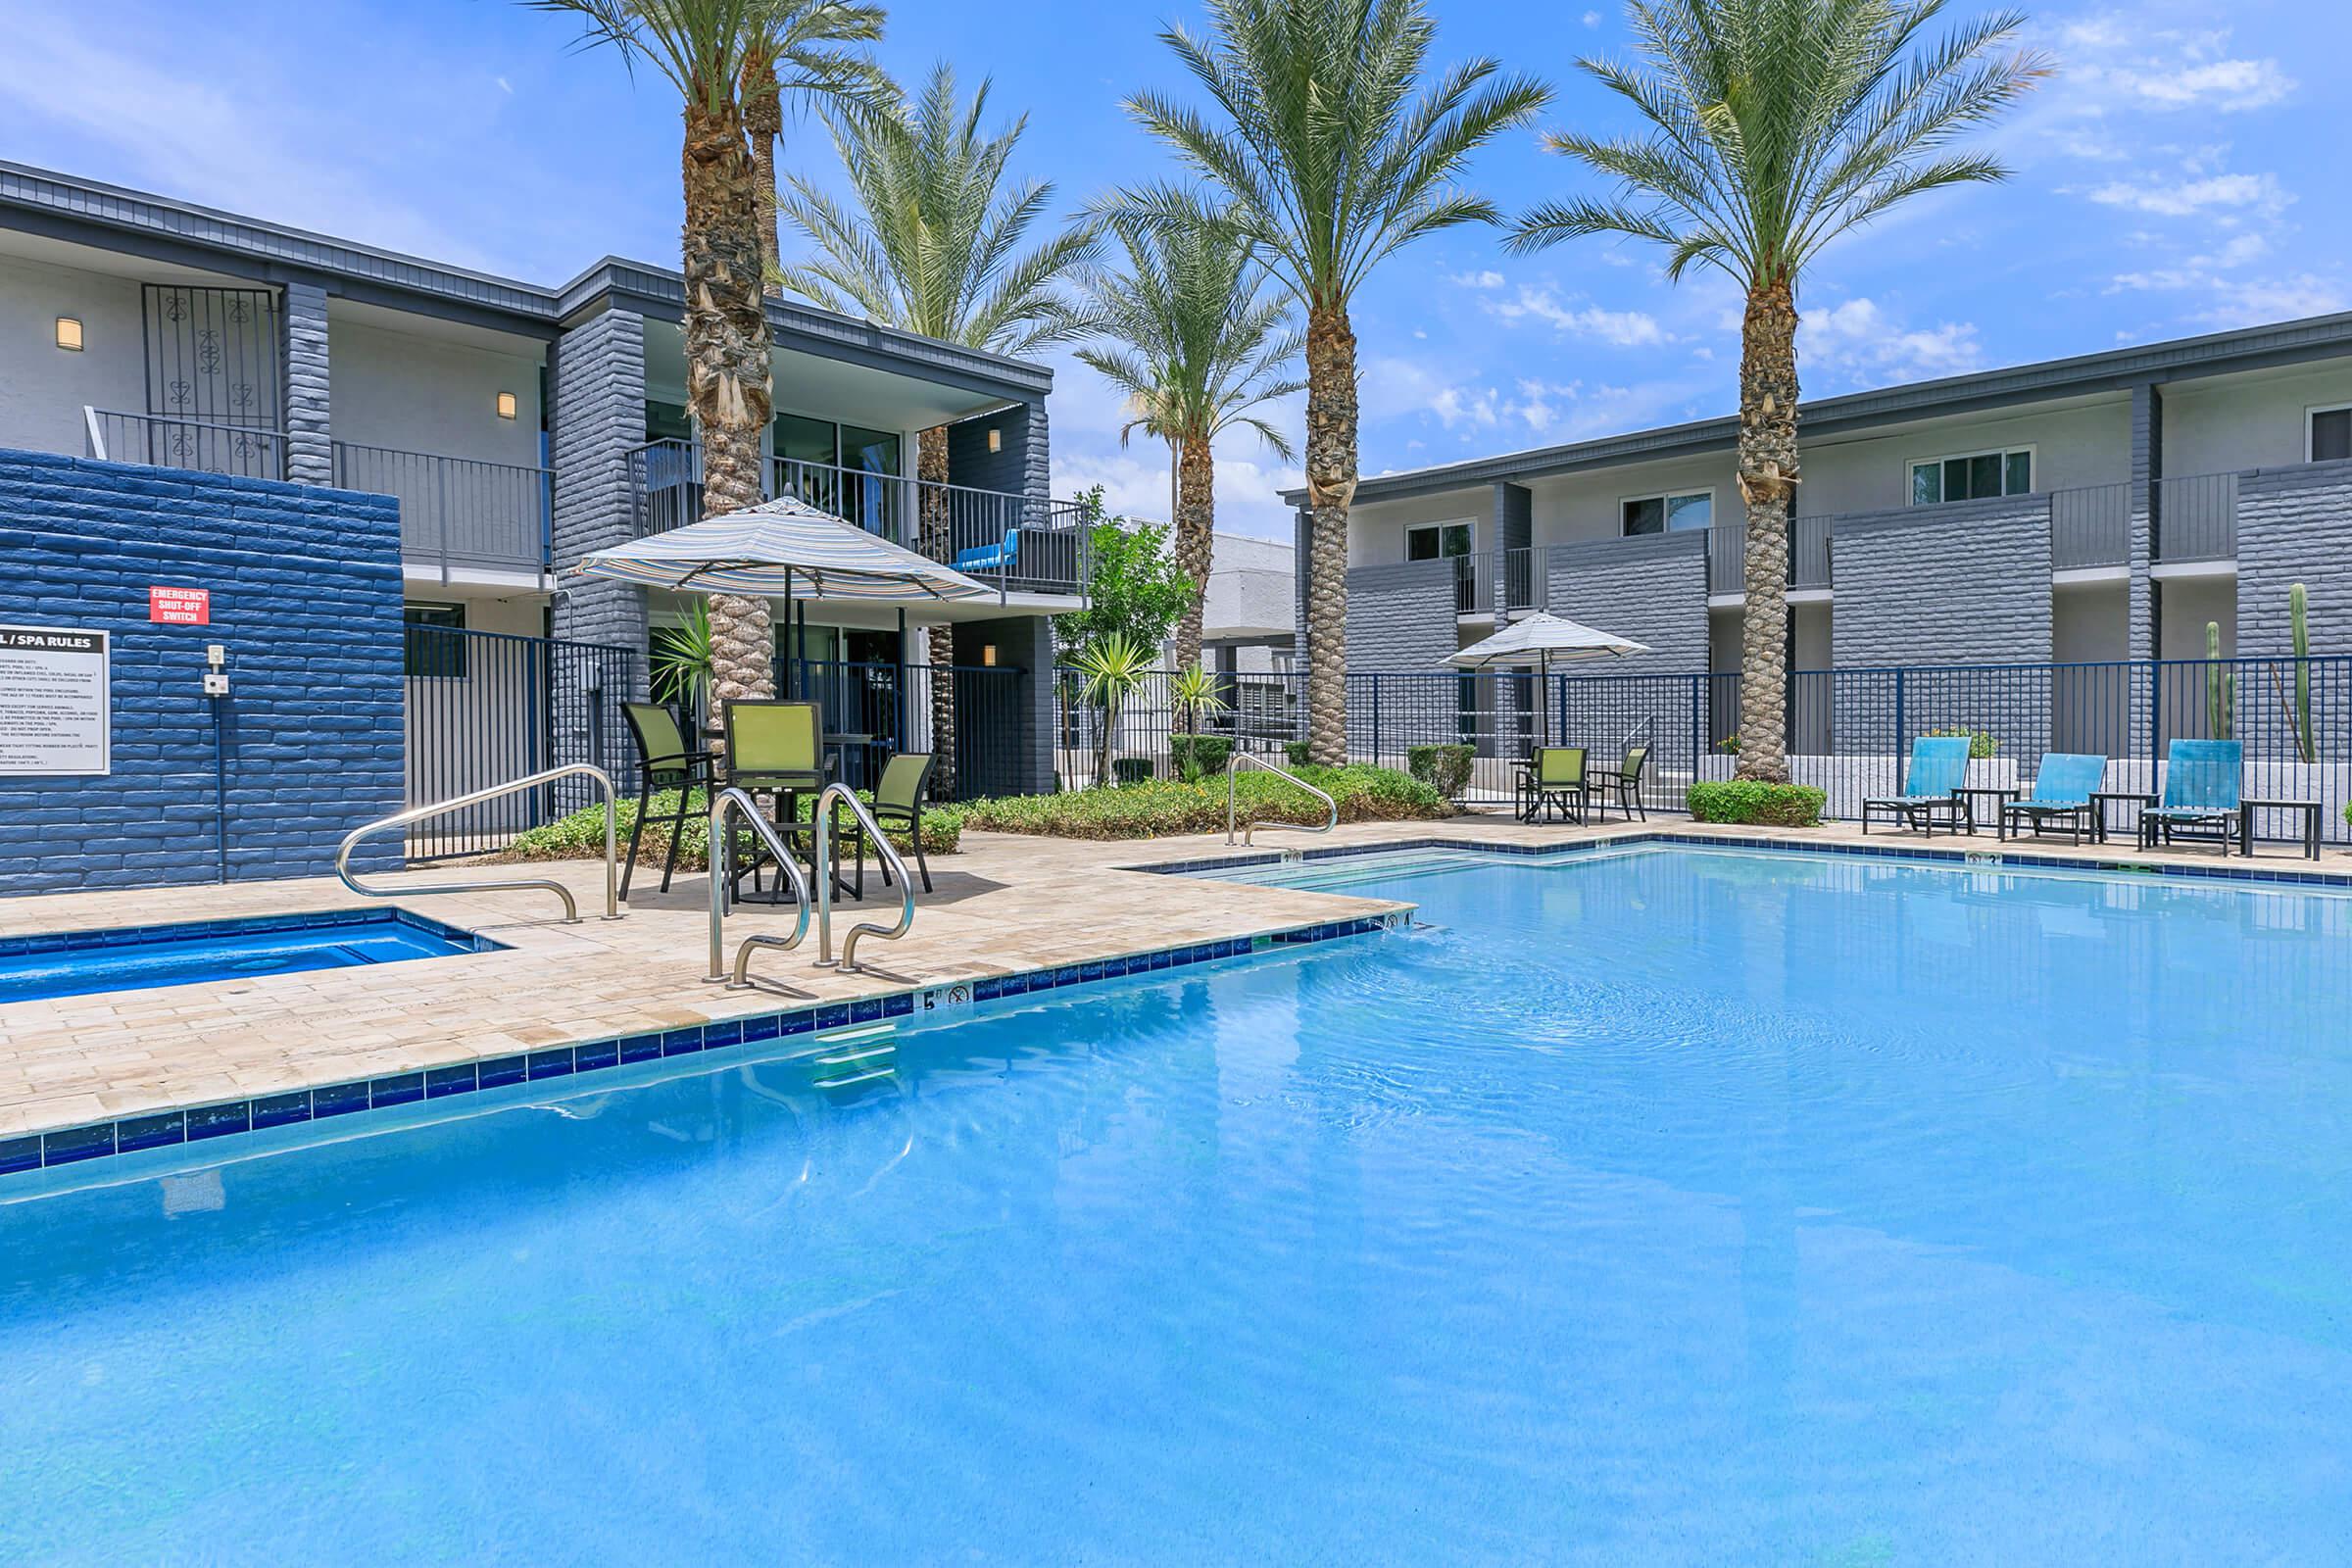 Rise Canyon West's large resort-style outdoor pool next to large palm trees